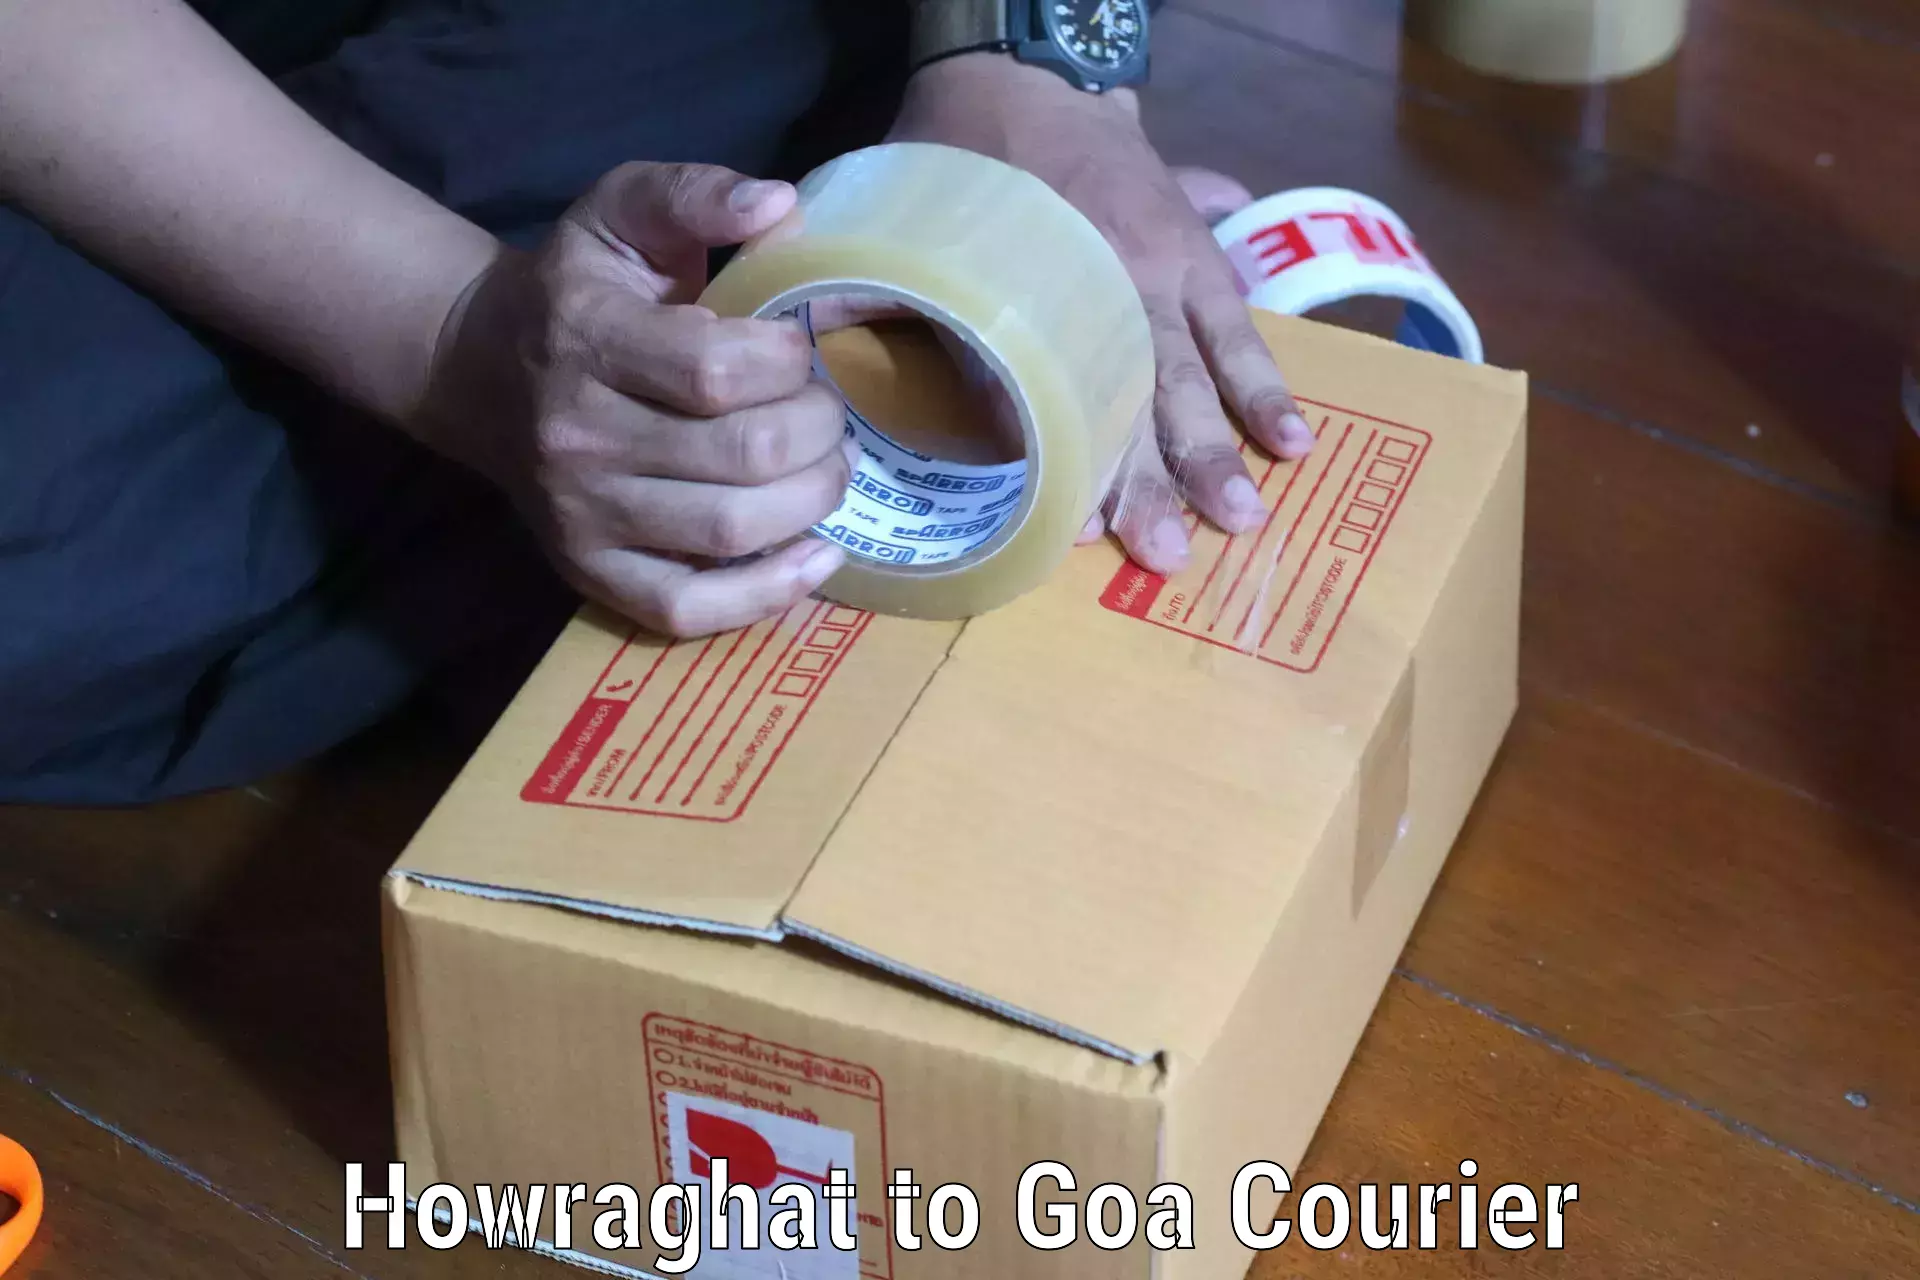 International courier networks Howraghat to Goa